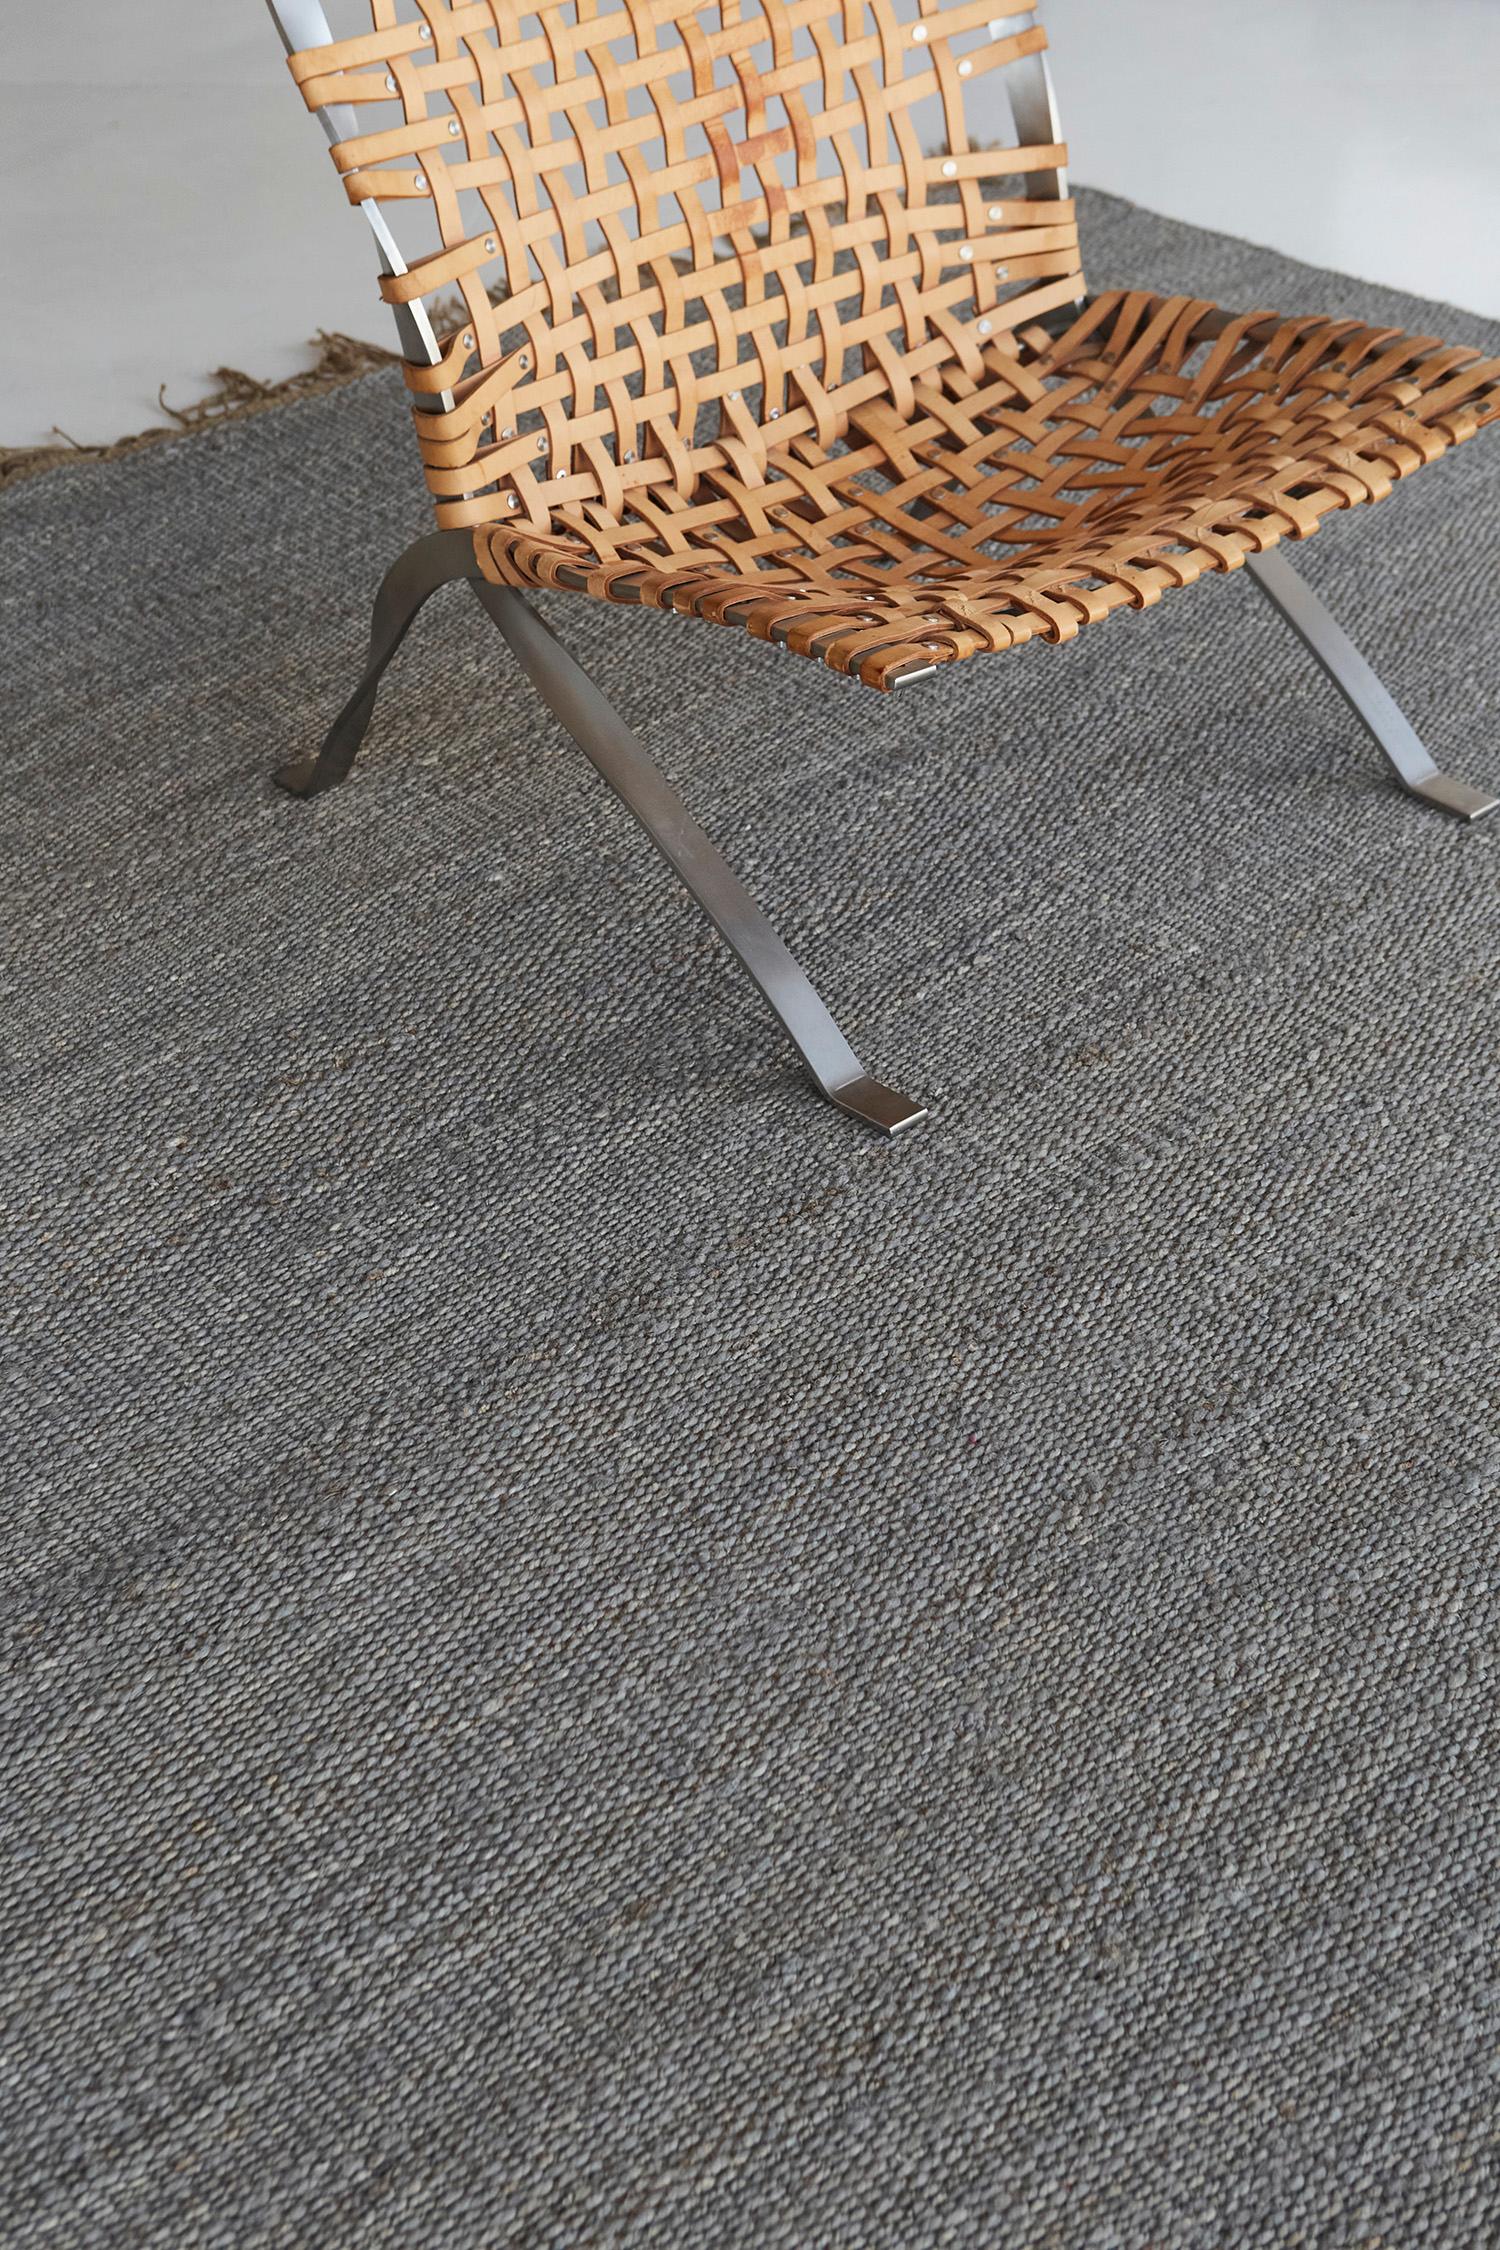 Solid Design Hemp Flatweave In New Condition For Sale In WEST HOLLYWOOD, CA